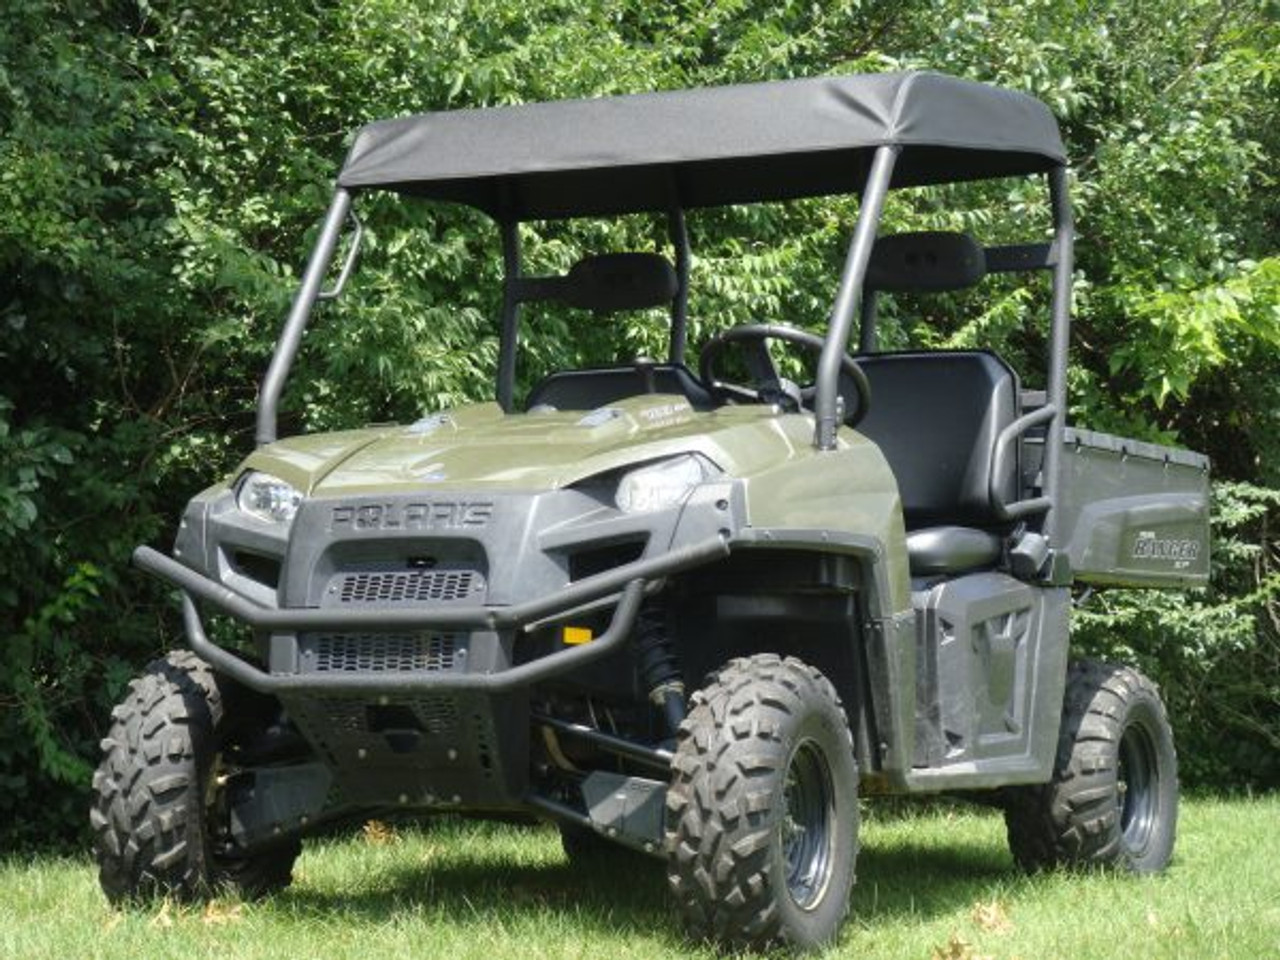 3 Star side x side Polaris Ranger 500/700/800/6x6 soft top front angle view